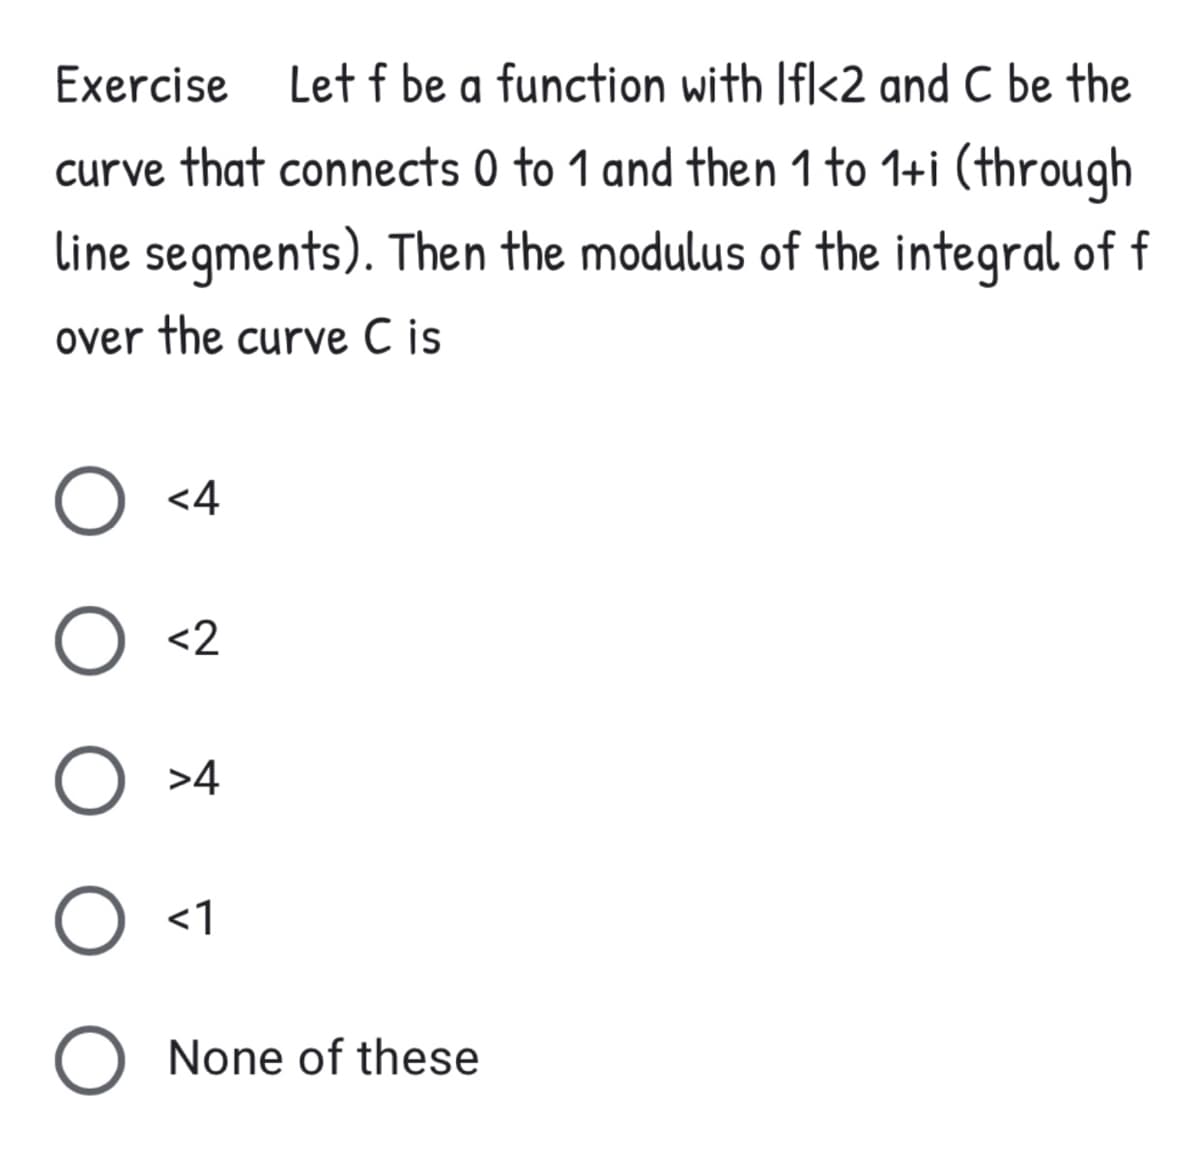 Exercise
Let f be a function with Ifl<2 and C be the
curve that connects 0 to 1 and then 1 to 1+i (through
line segments). Then the modulus of the integral of f
over the curve C is
O <4
<2
>4
O <1
O None of these
